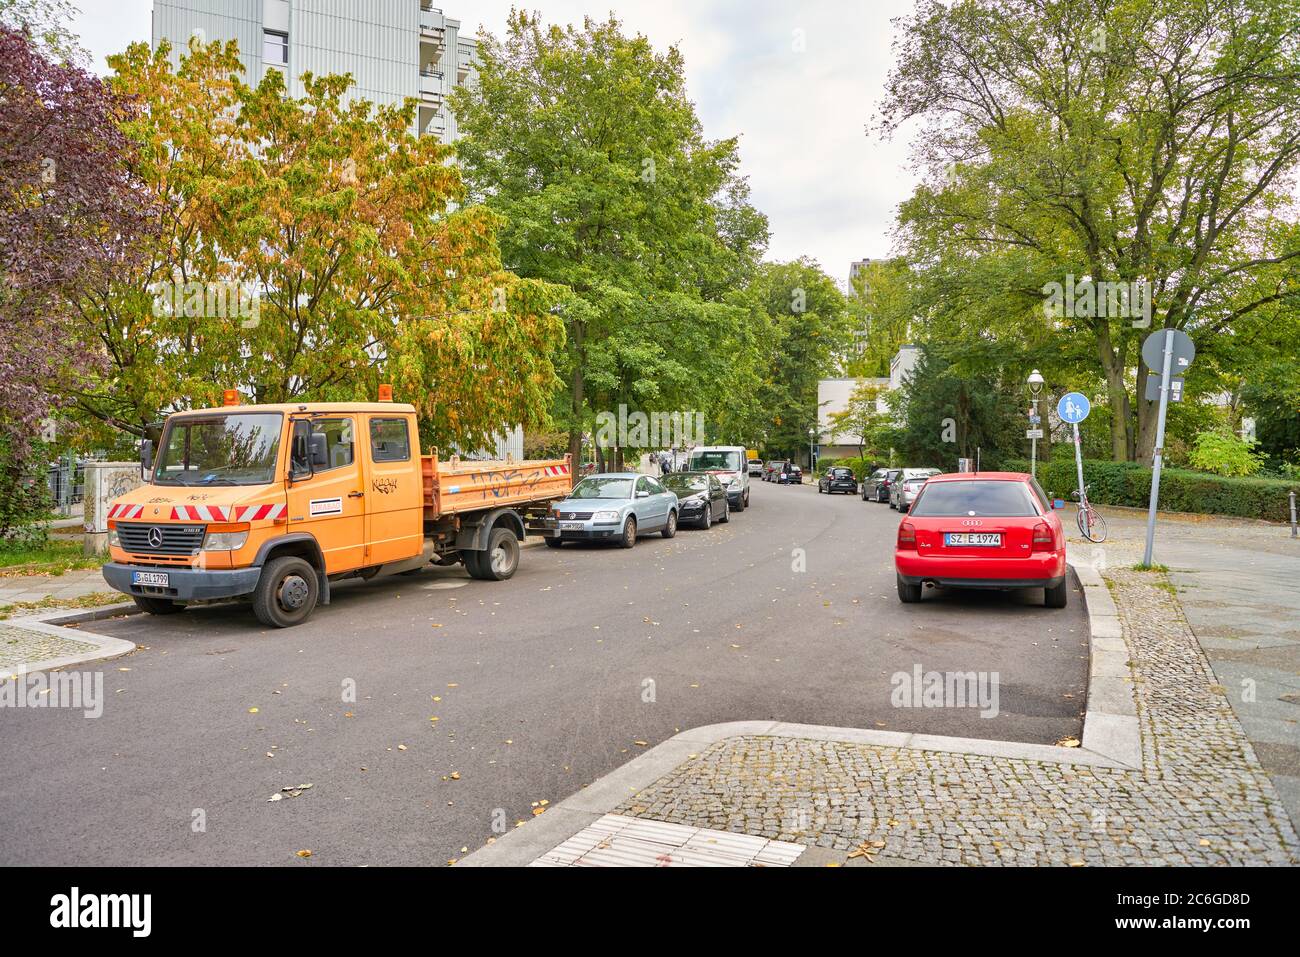 BERLIN, GERMANY - CIRCA SEPTEMBER, 2019: street level view of a road in Berlin in the daytime. Stock Photo